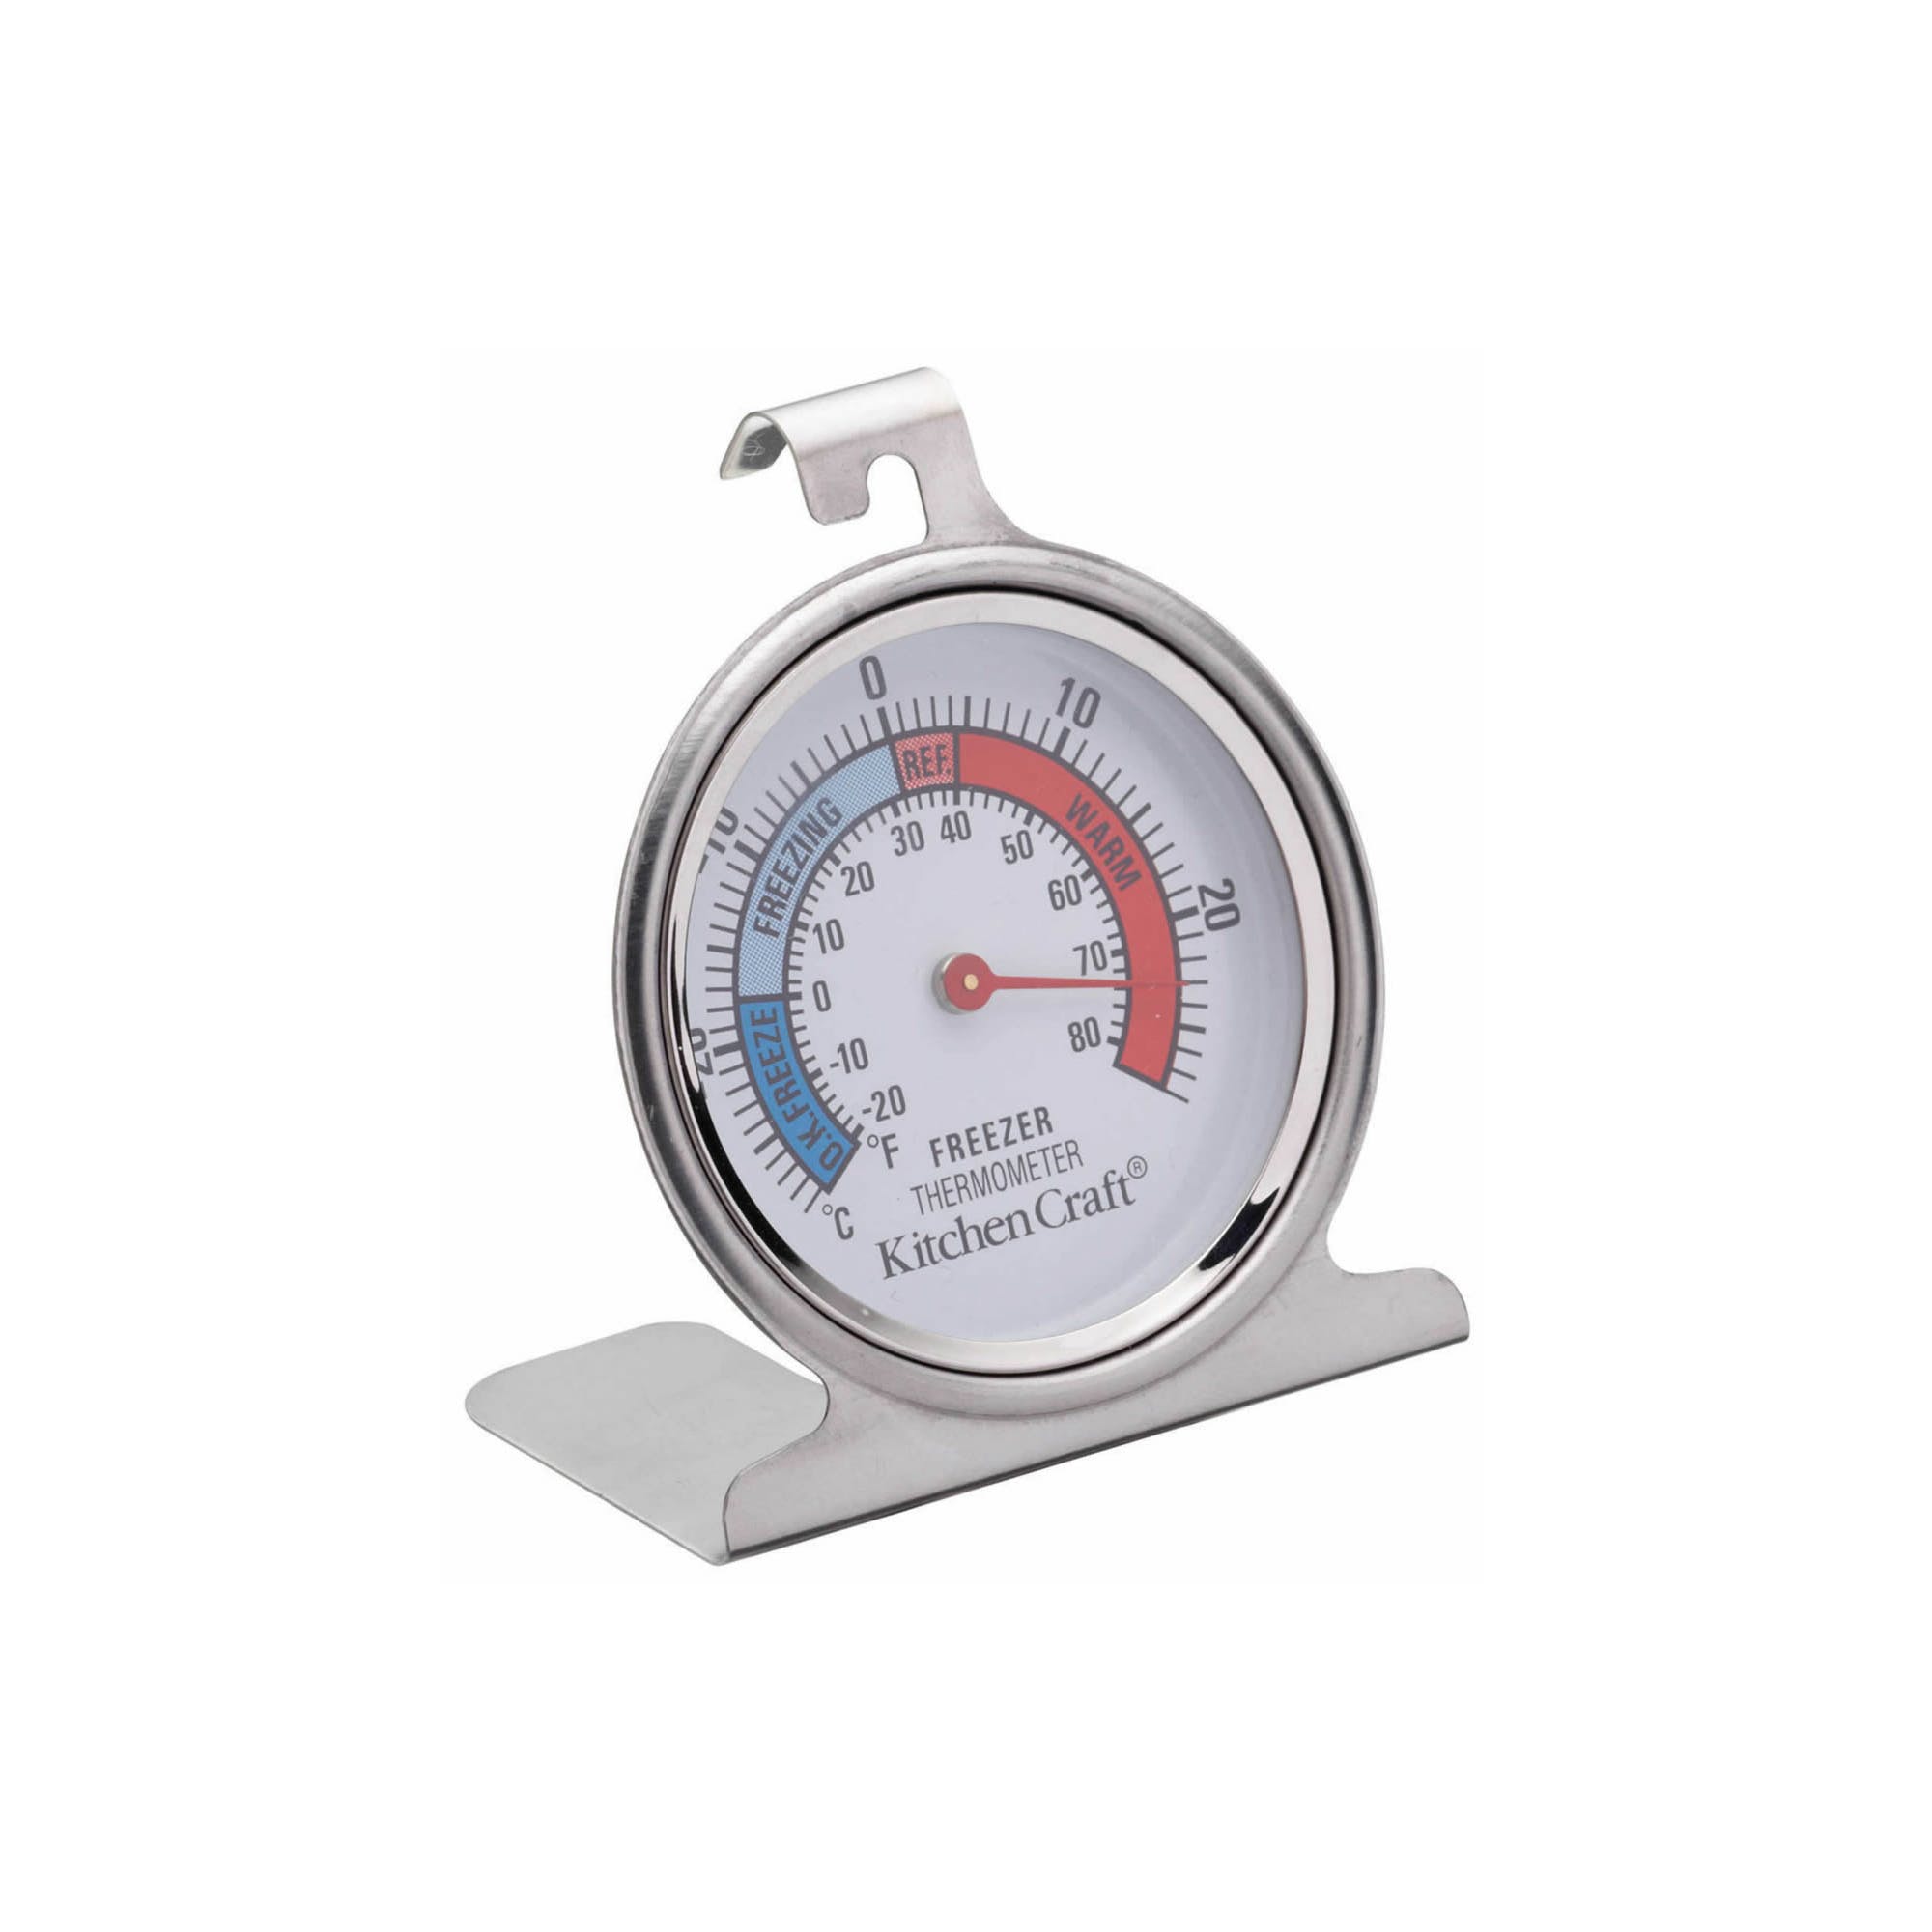 KitchenCraft Stainless Steel Fridge Thermometer - The Cooks Cupboard Ltd